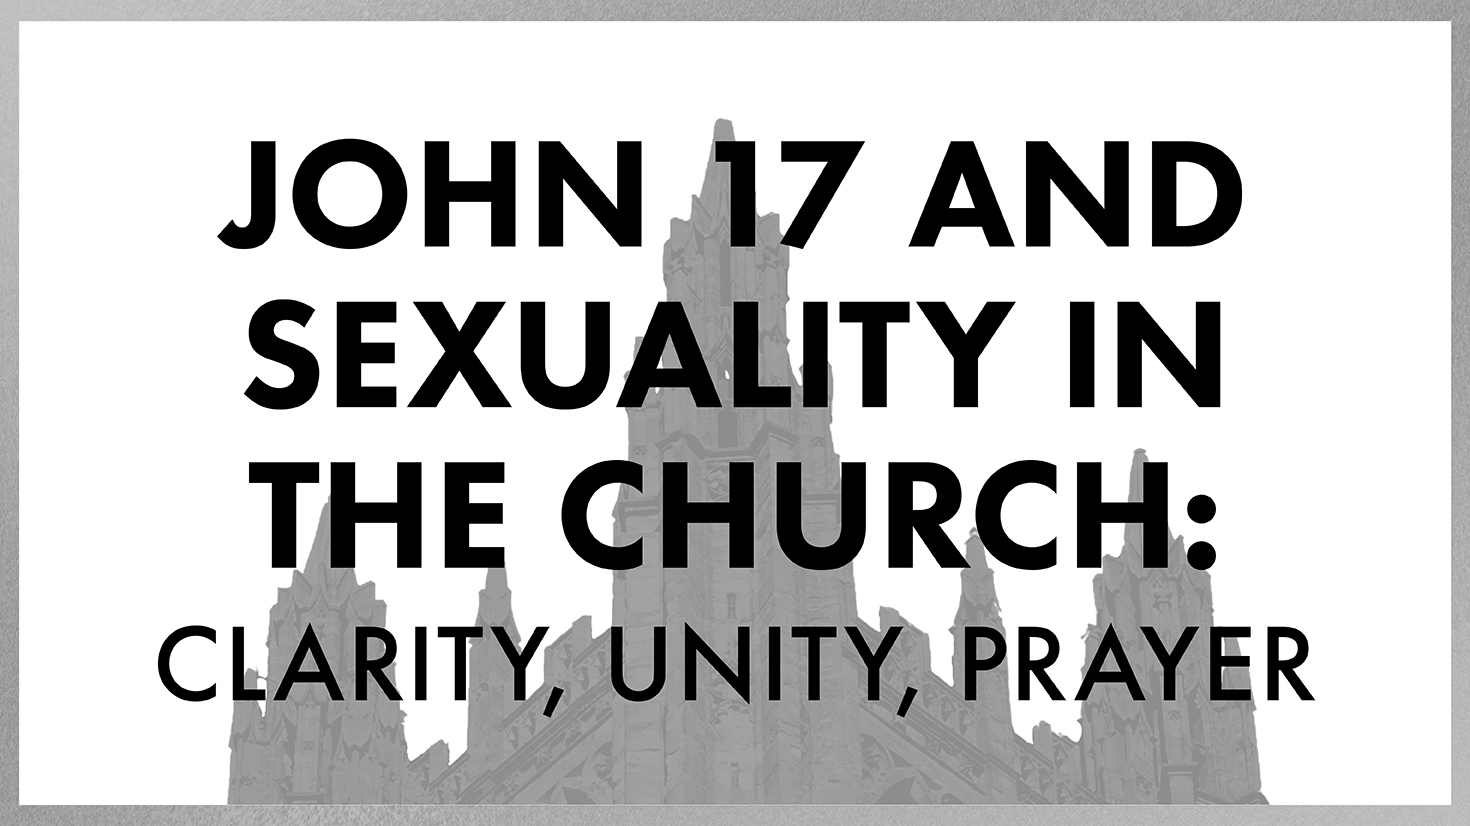 John 17 and Sexuality in the Church: Clarity, Unity, Prayer